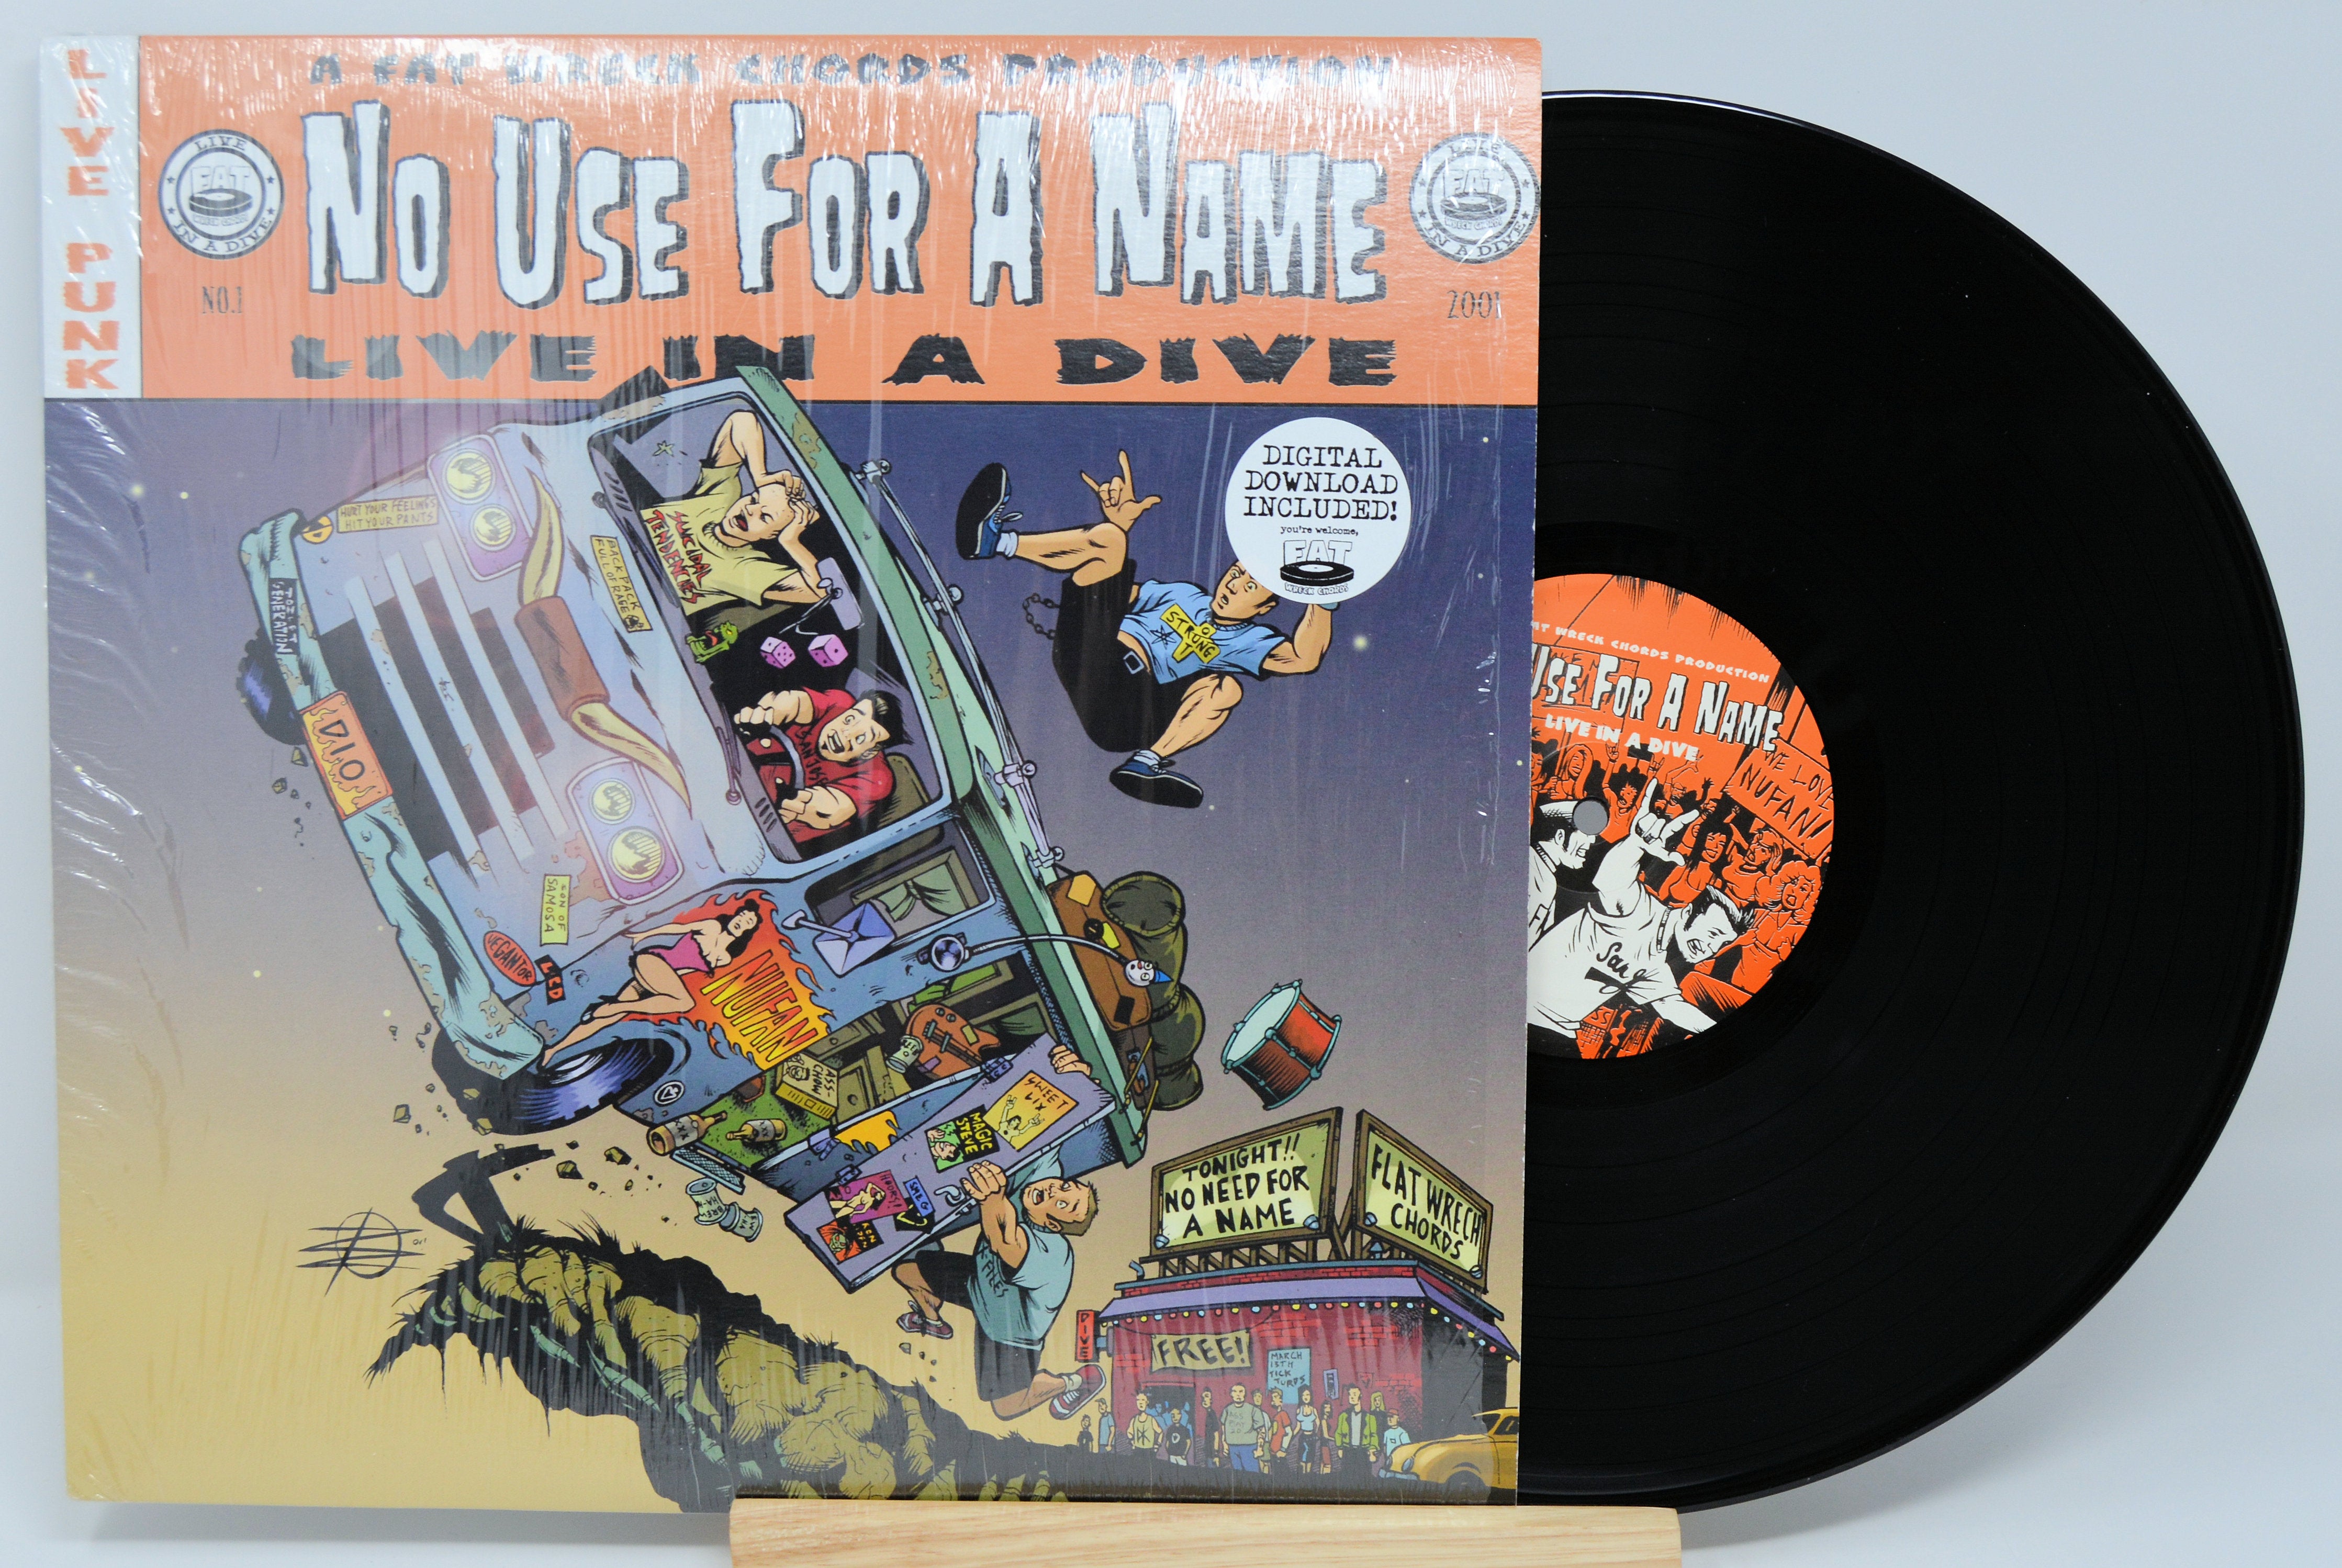 NO USE FOR A NAME live in a dive 新品レコード | nate-hospital.com